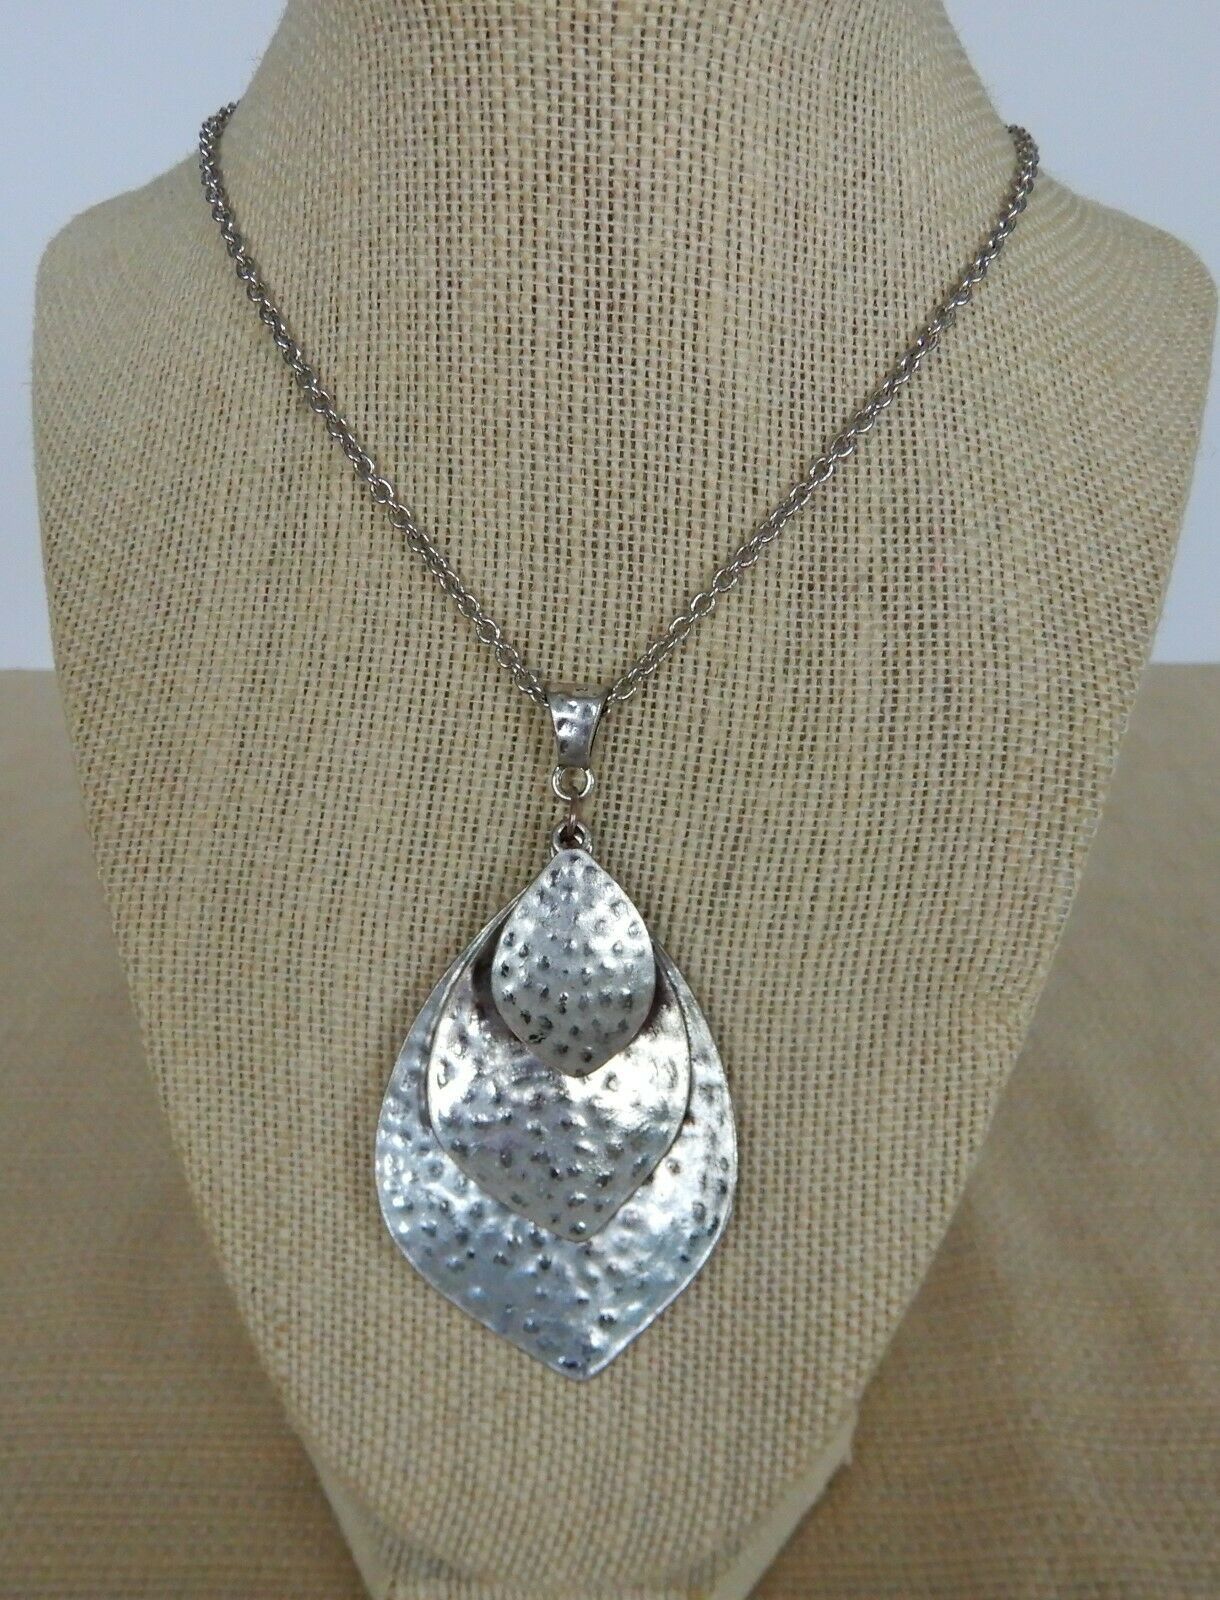 Primary image for Lovely vtg silver tone hammered metal three layer abstract leaf pendant necklace